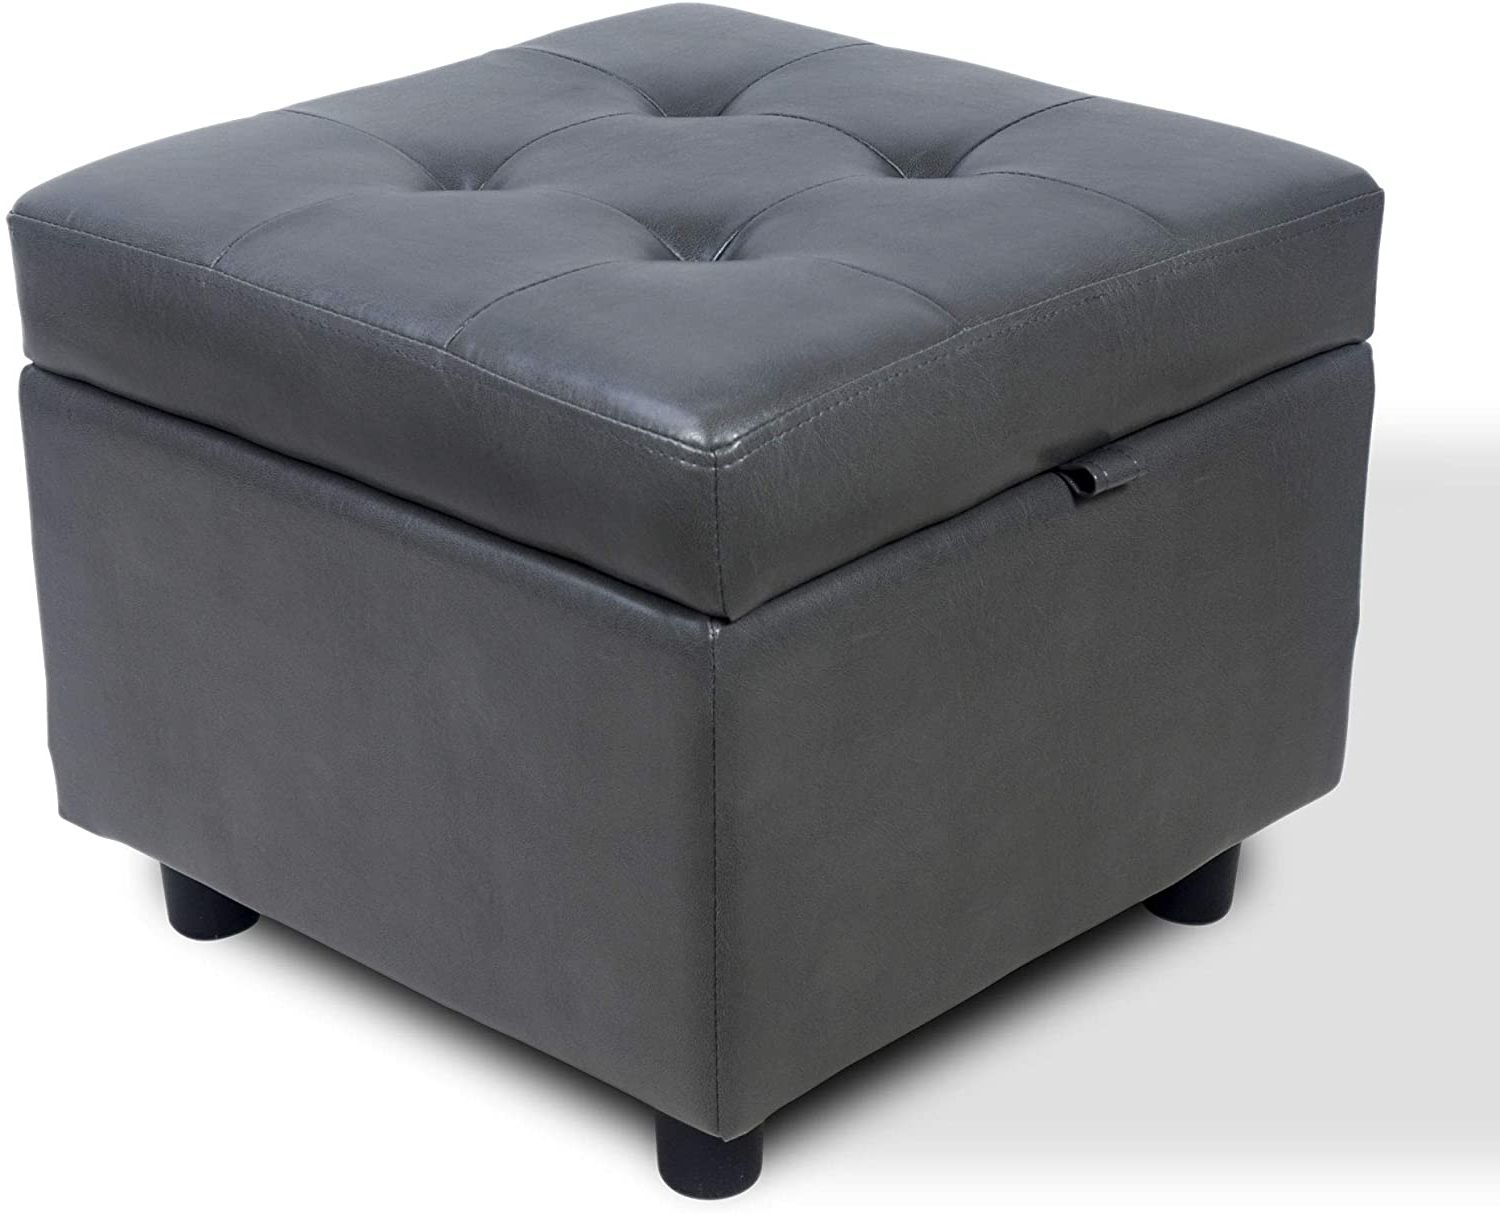 Well Known Square Cube Ottomans Inside Tufted Leather Square Ottoman With Storage And Hinged Lid, Foot Rest (View 3 of 10)